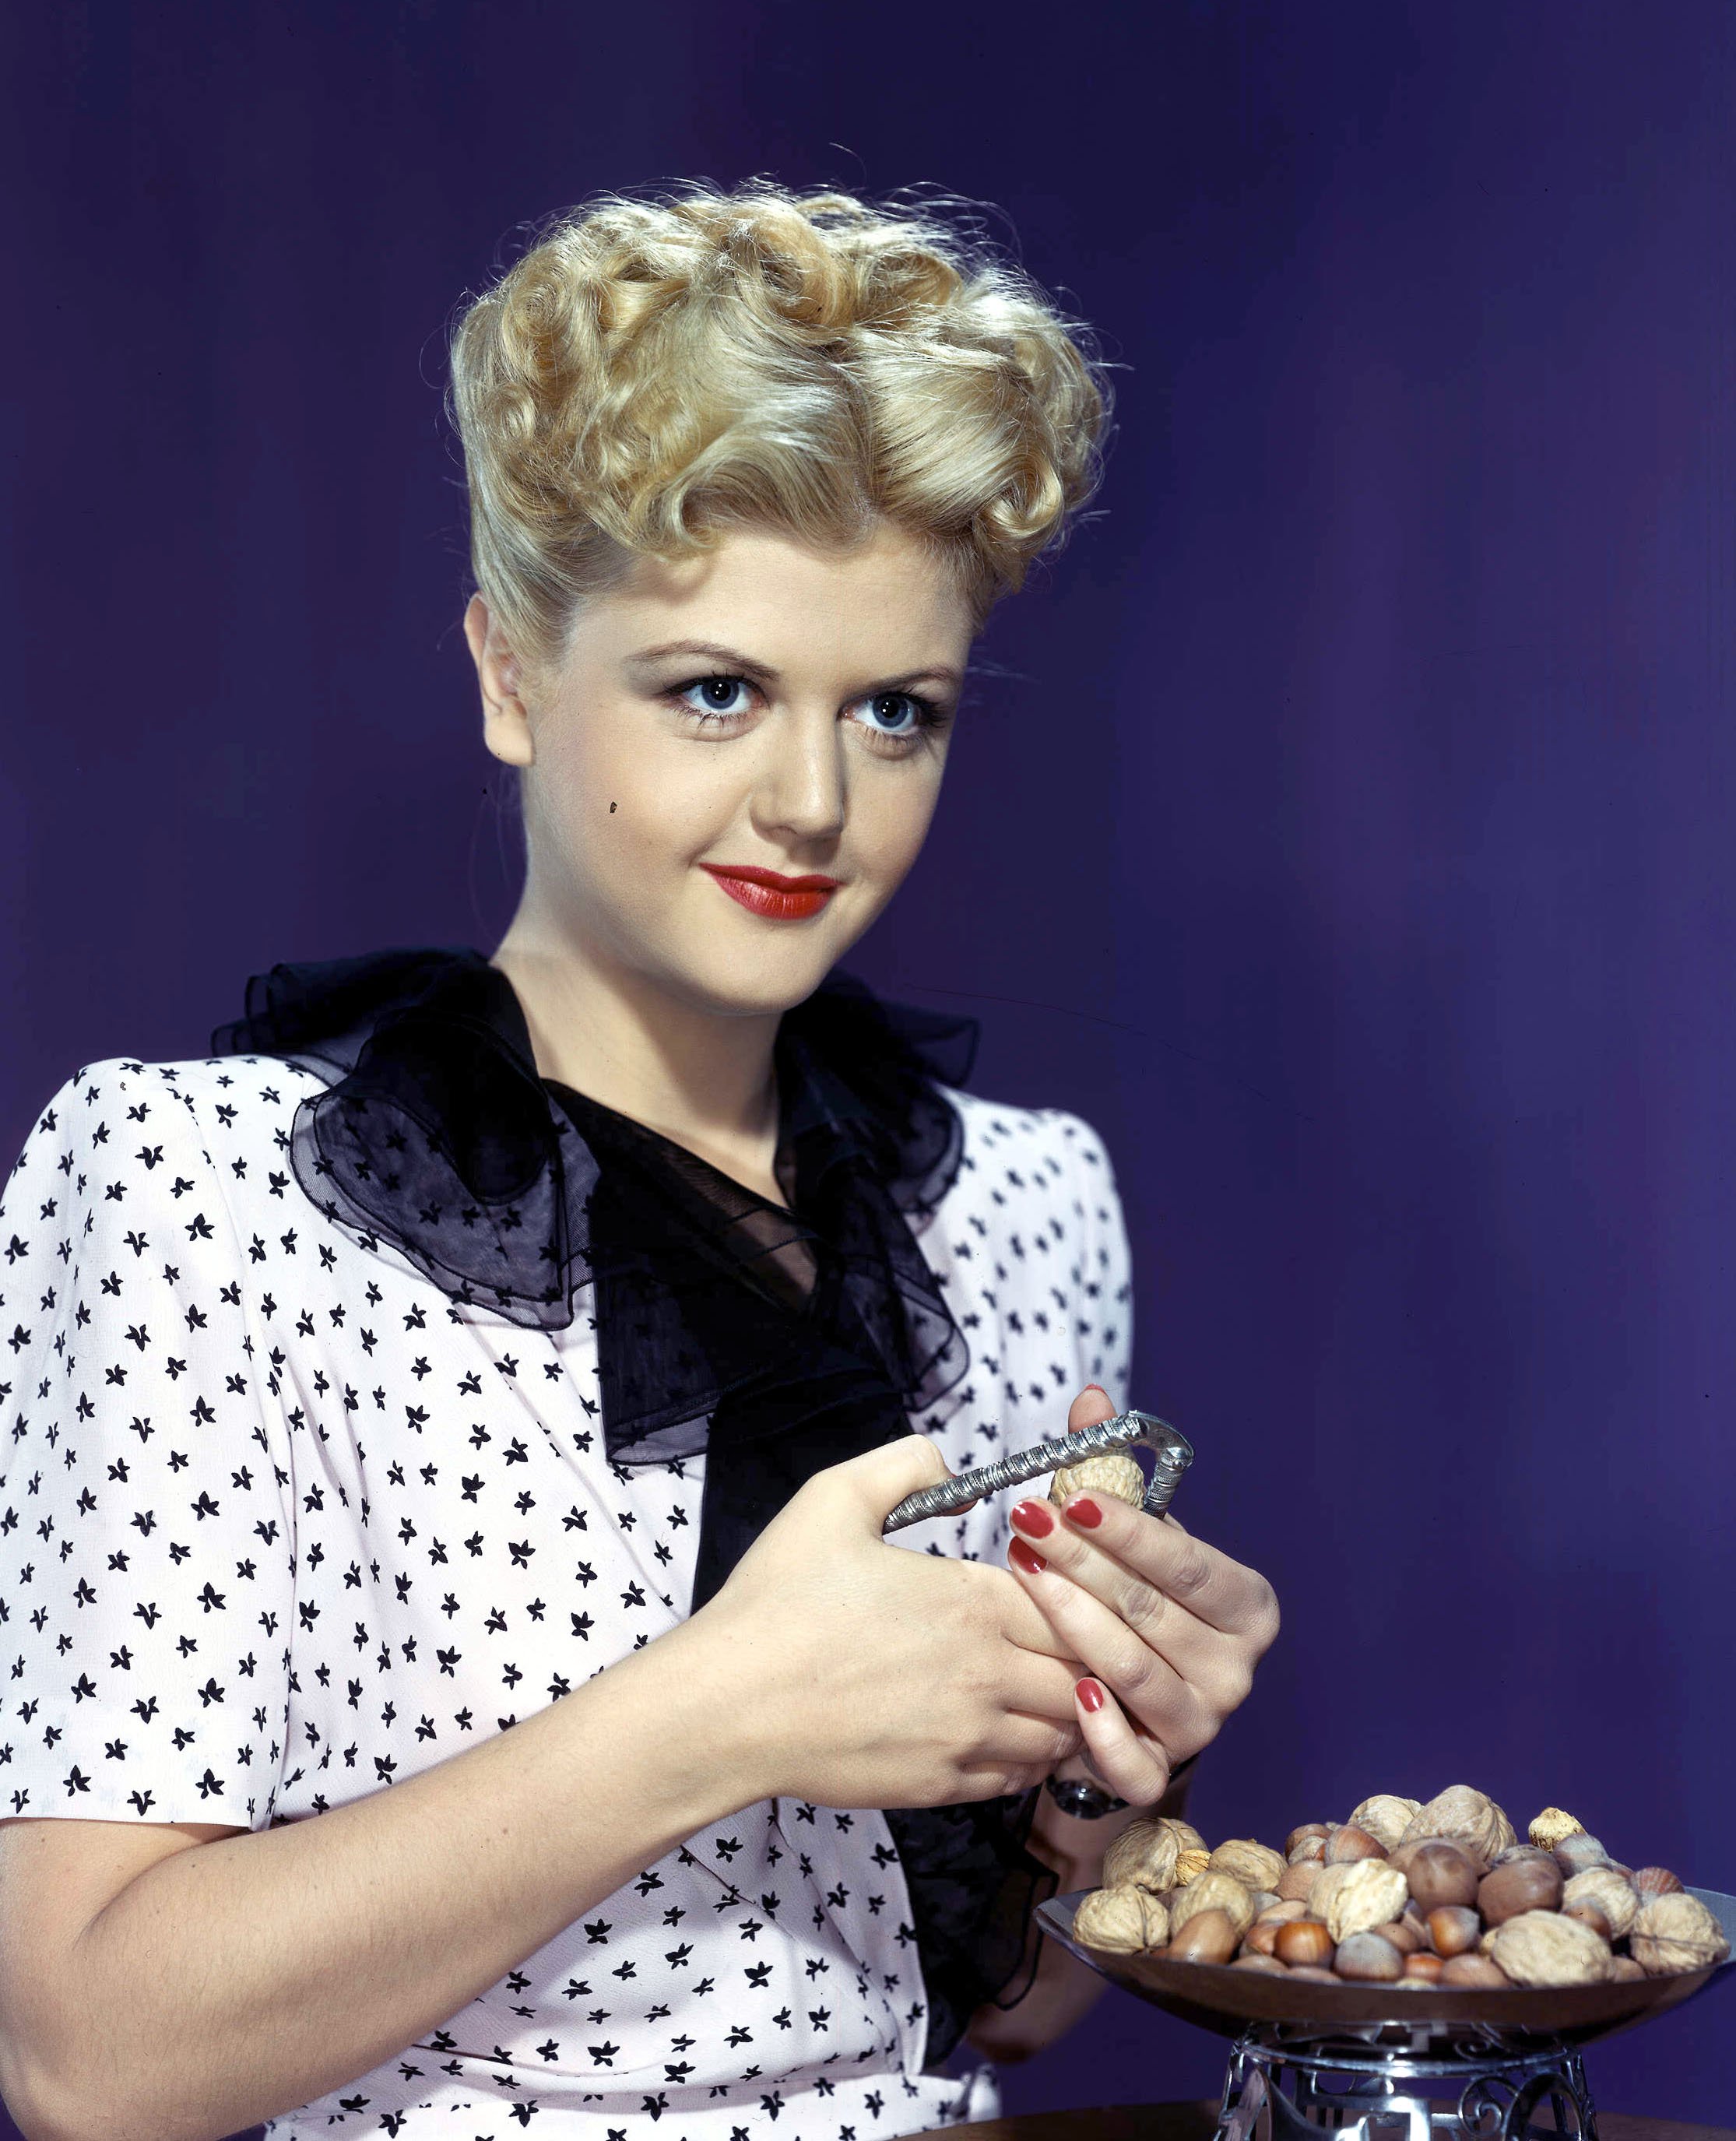 A portrait of Angela Lansbury taken in 1953. | Source: Getty Images